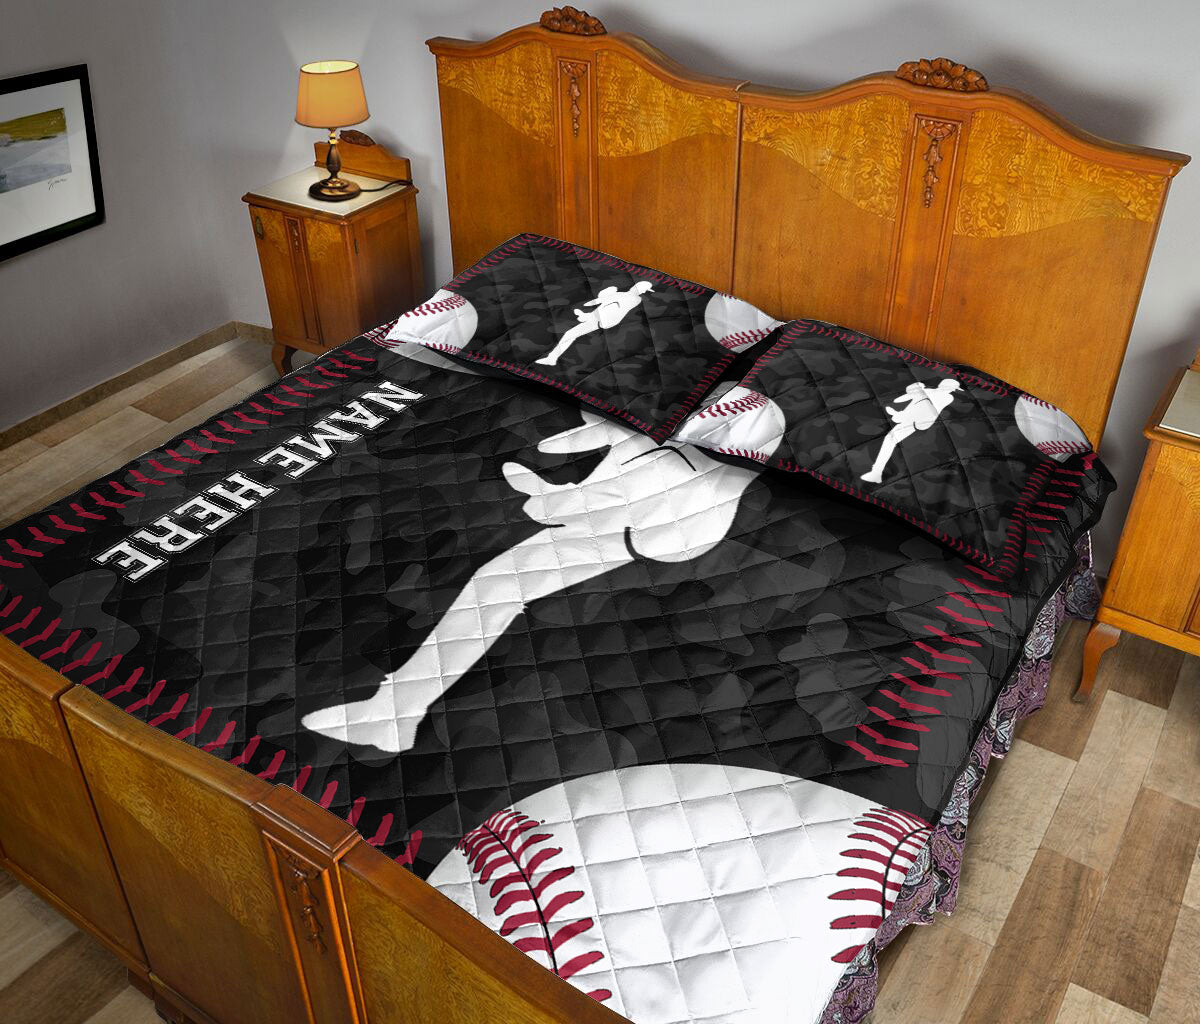 Ohaprints-Quilt-Bed-Set-Pillowcase-Baseball-Player-Ball-Black-Camo-Pattern-Sports-Gift-Custom-Personalized-Name-Blanket-Bedspread-Bedding-2446-Queen (80'' x 90'')